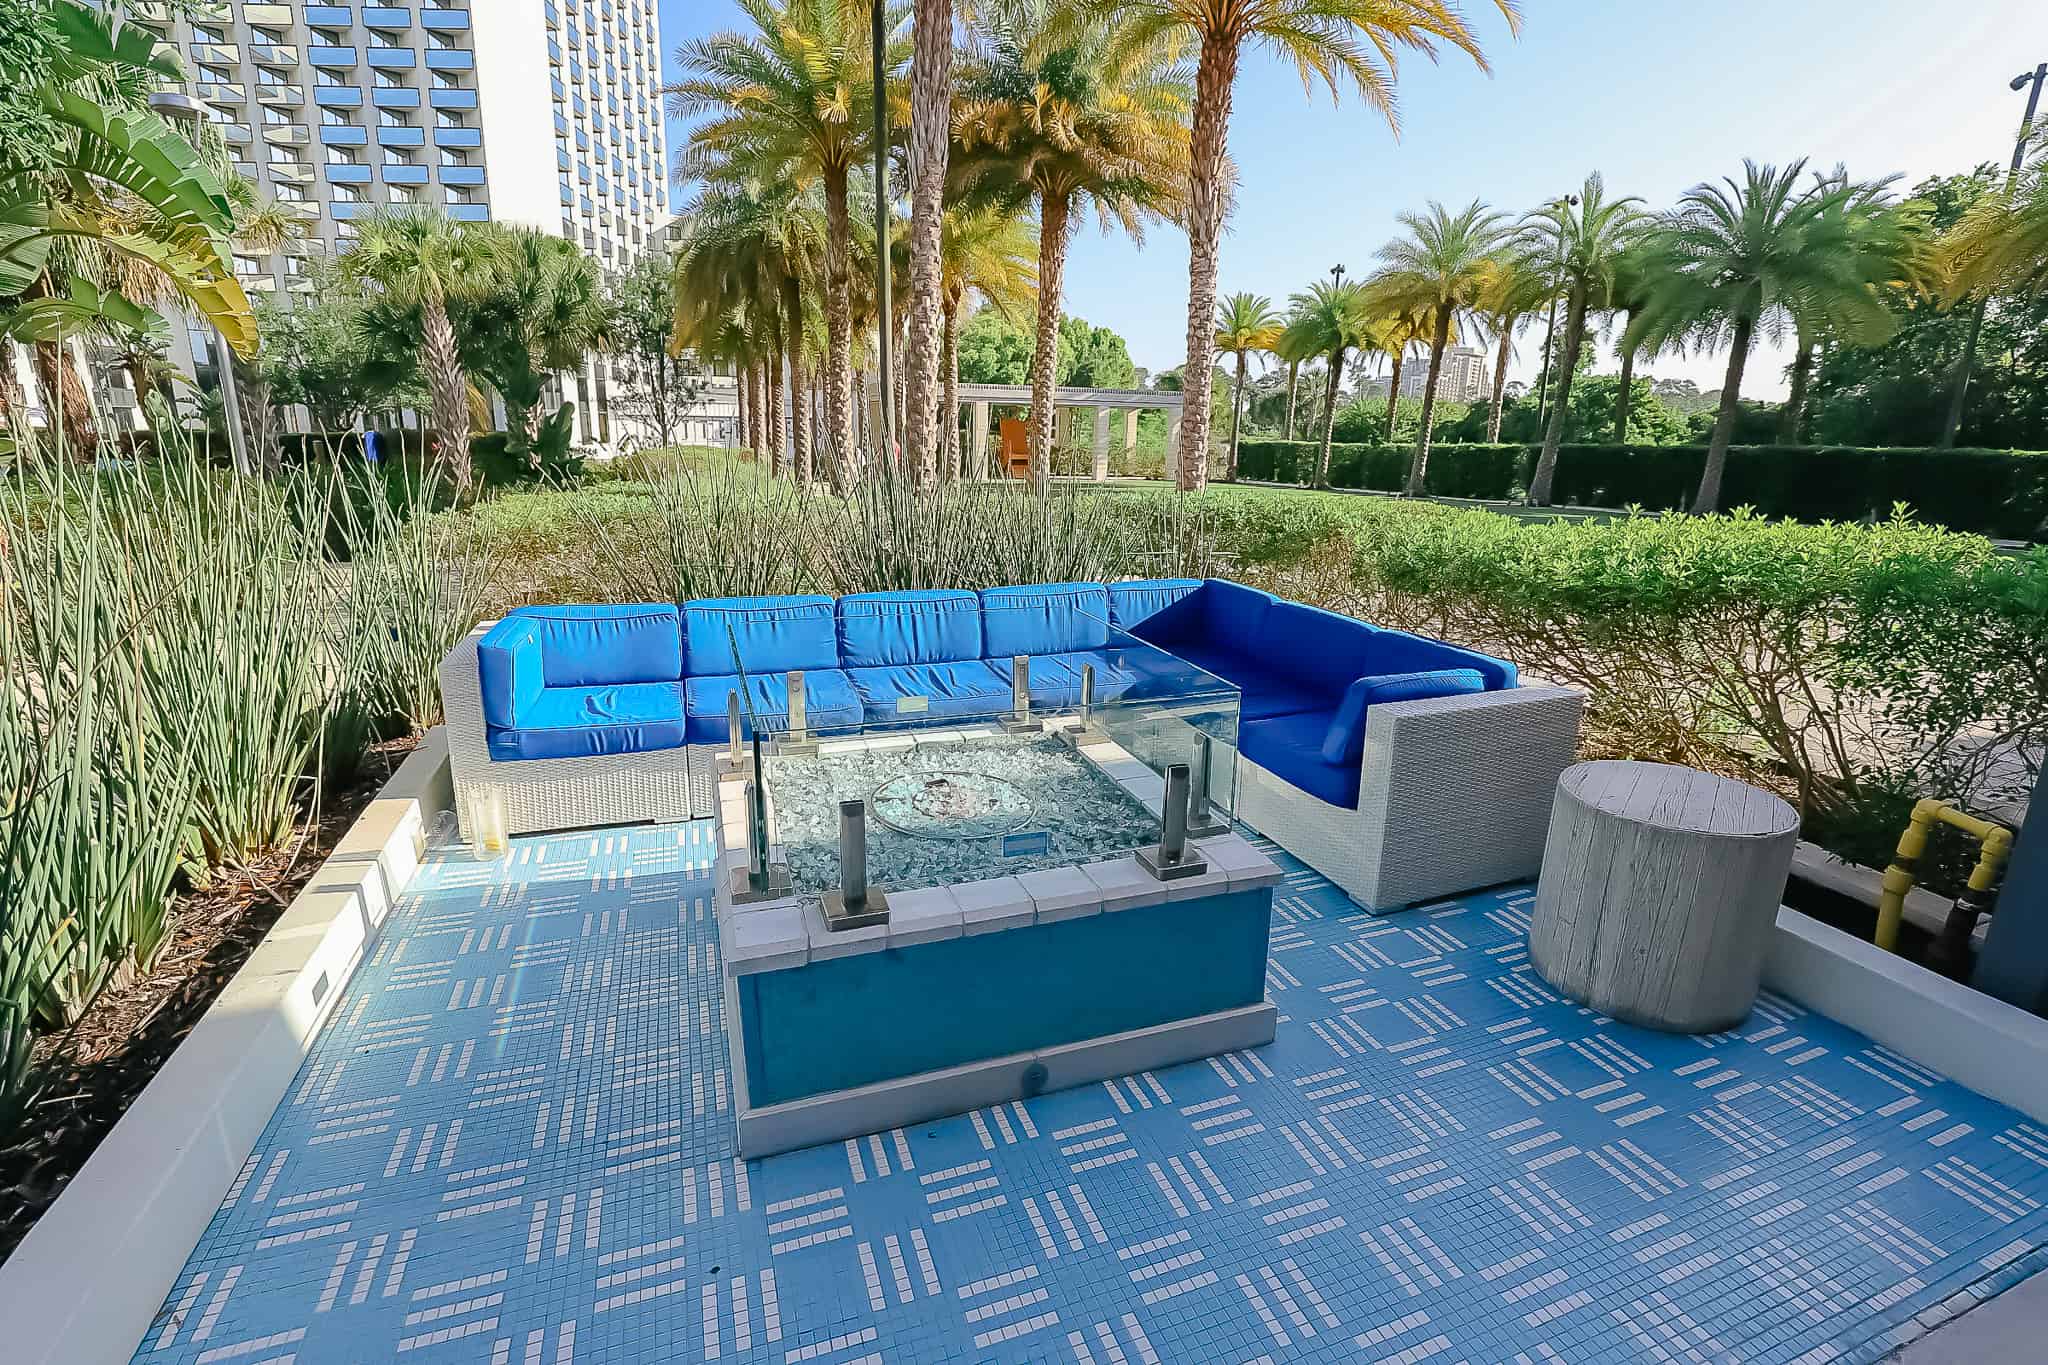 a lounge seating area with a fire pit near the pool 